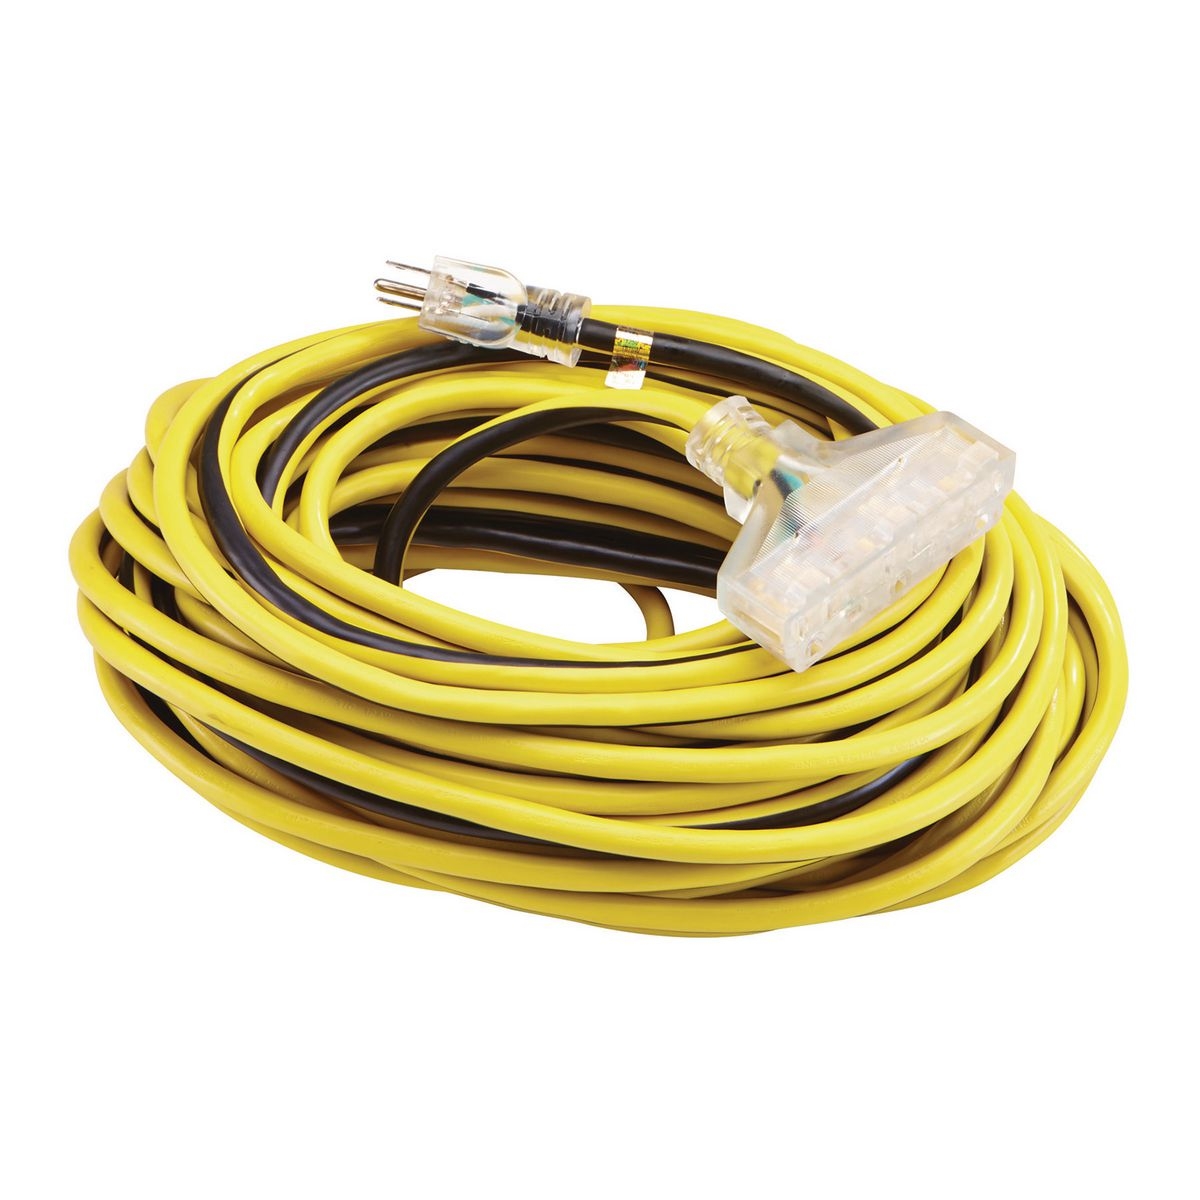 VANGUARD 100 ft. x 12 Gauge Multi-Outlet Extension Cord with Indicator Light - Item 62908 / 62345 / 62907 / 99960